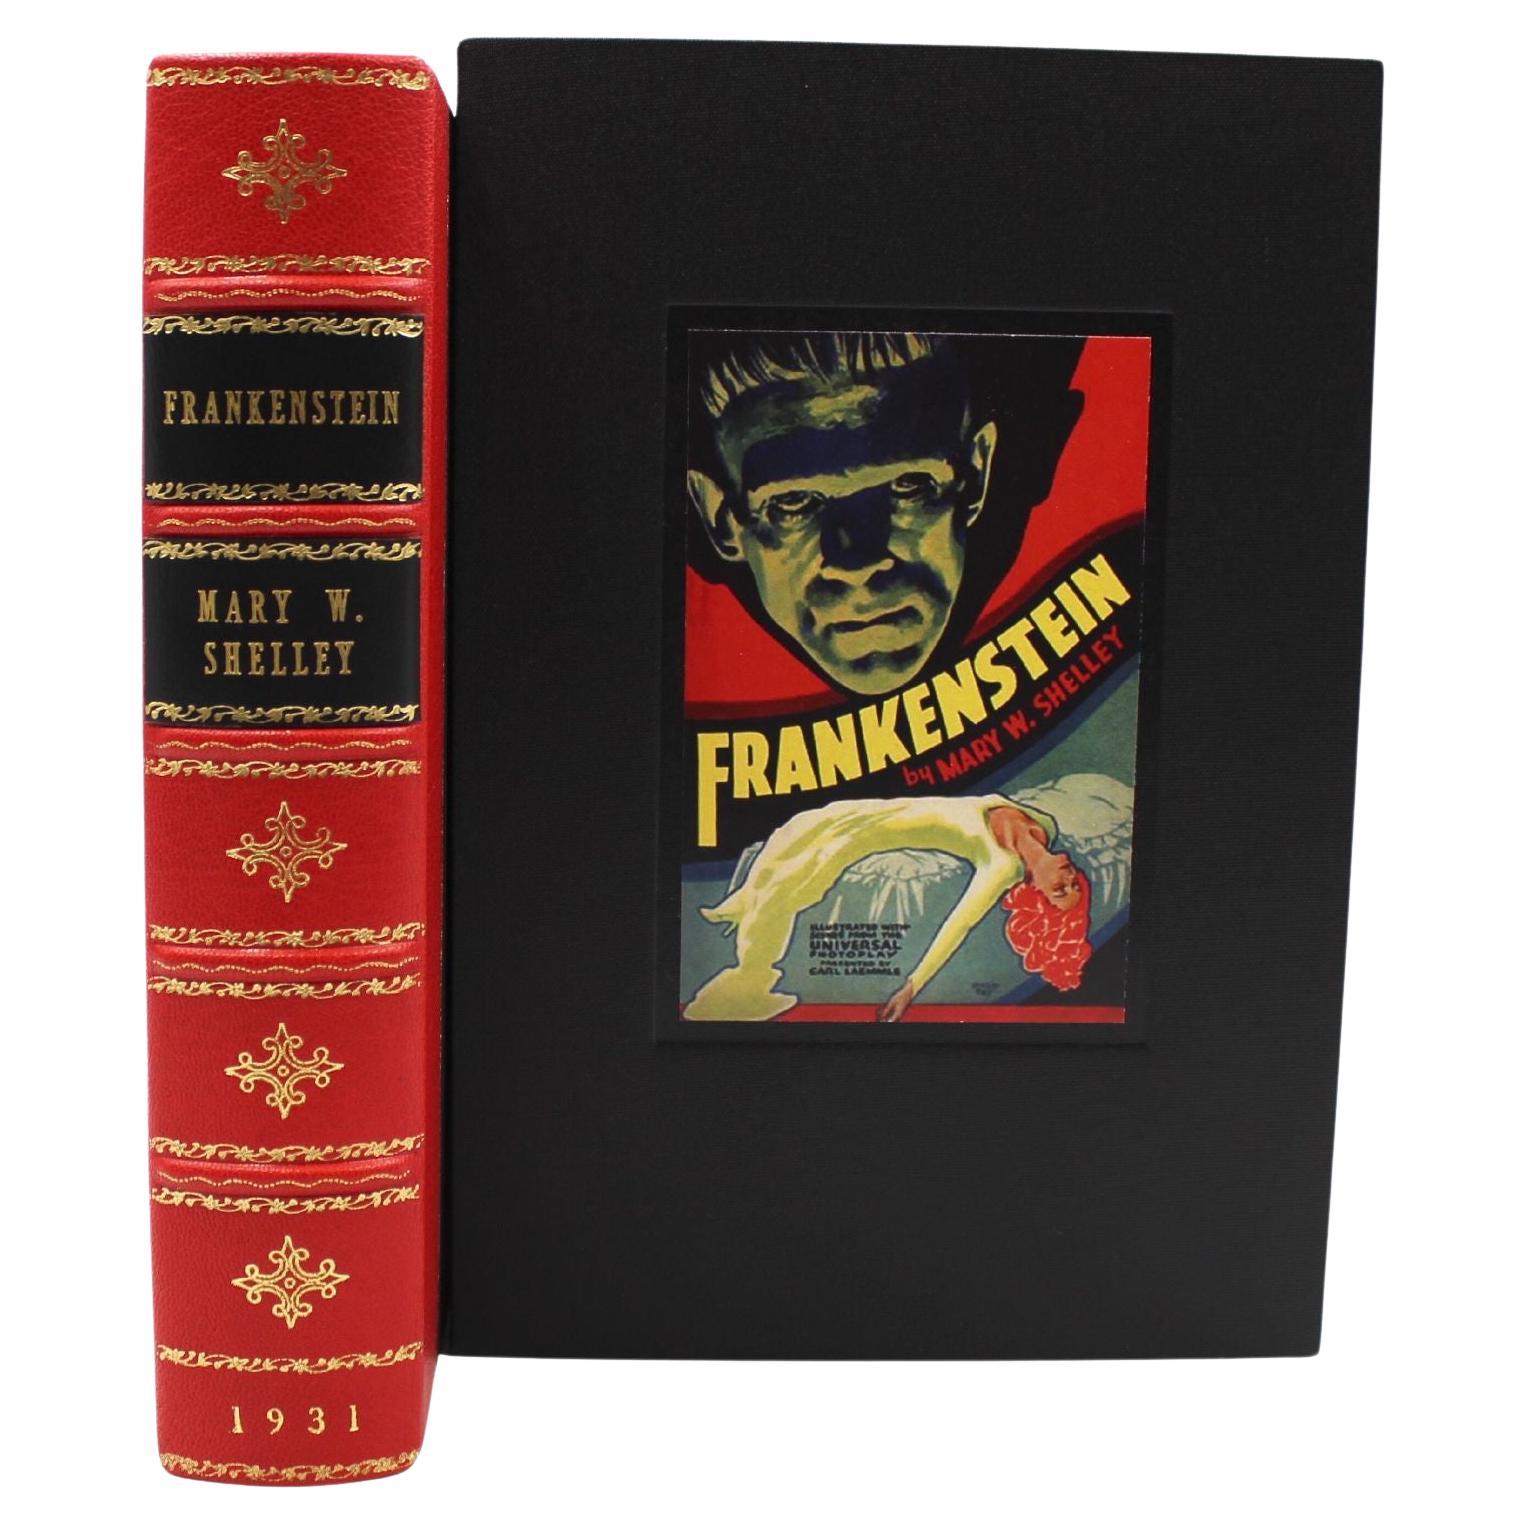 Frankenstein by Mary W. Shelley, Photoplay Grosset & Dunlap Edition, 1931 For Sale